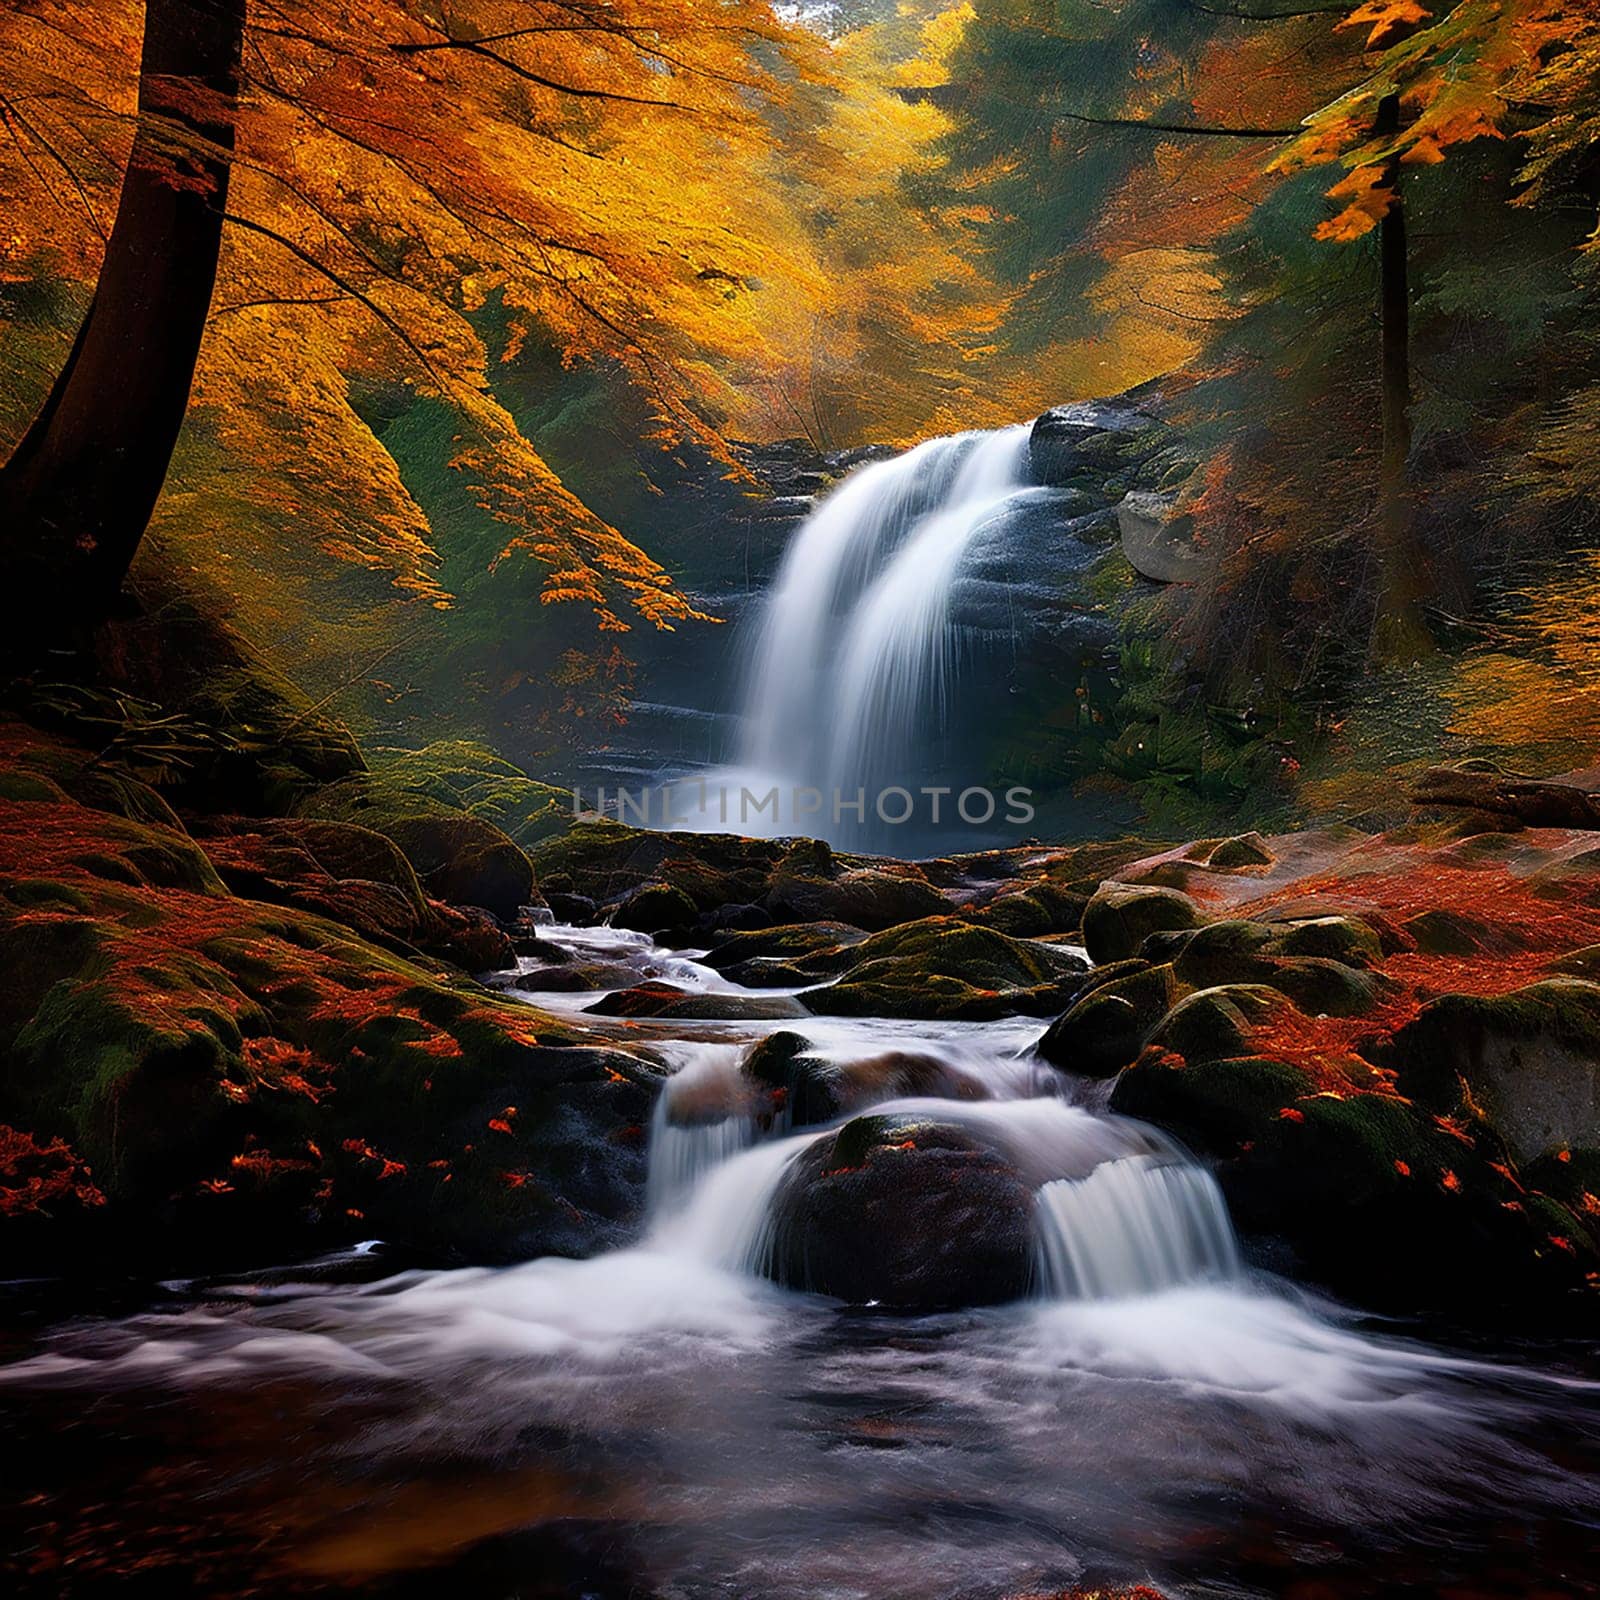 Tranquil Falls: Nature's Palette in Autumn